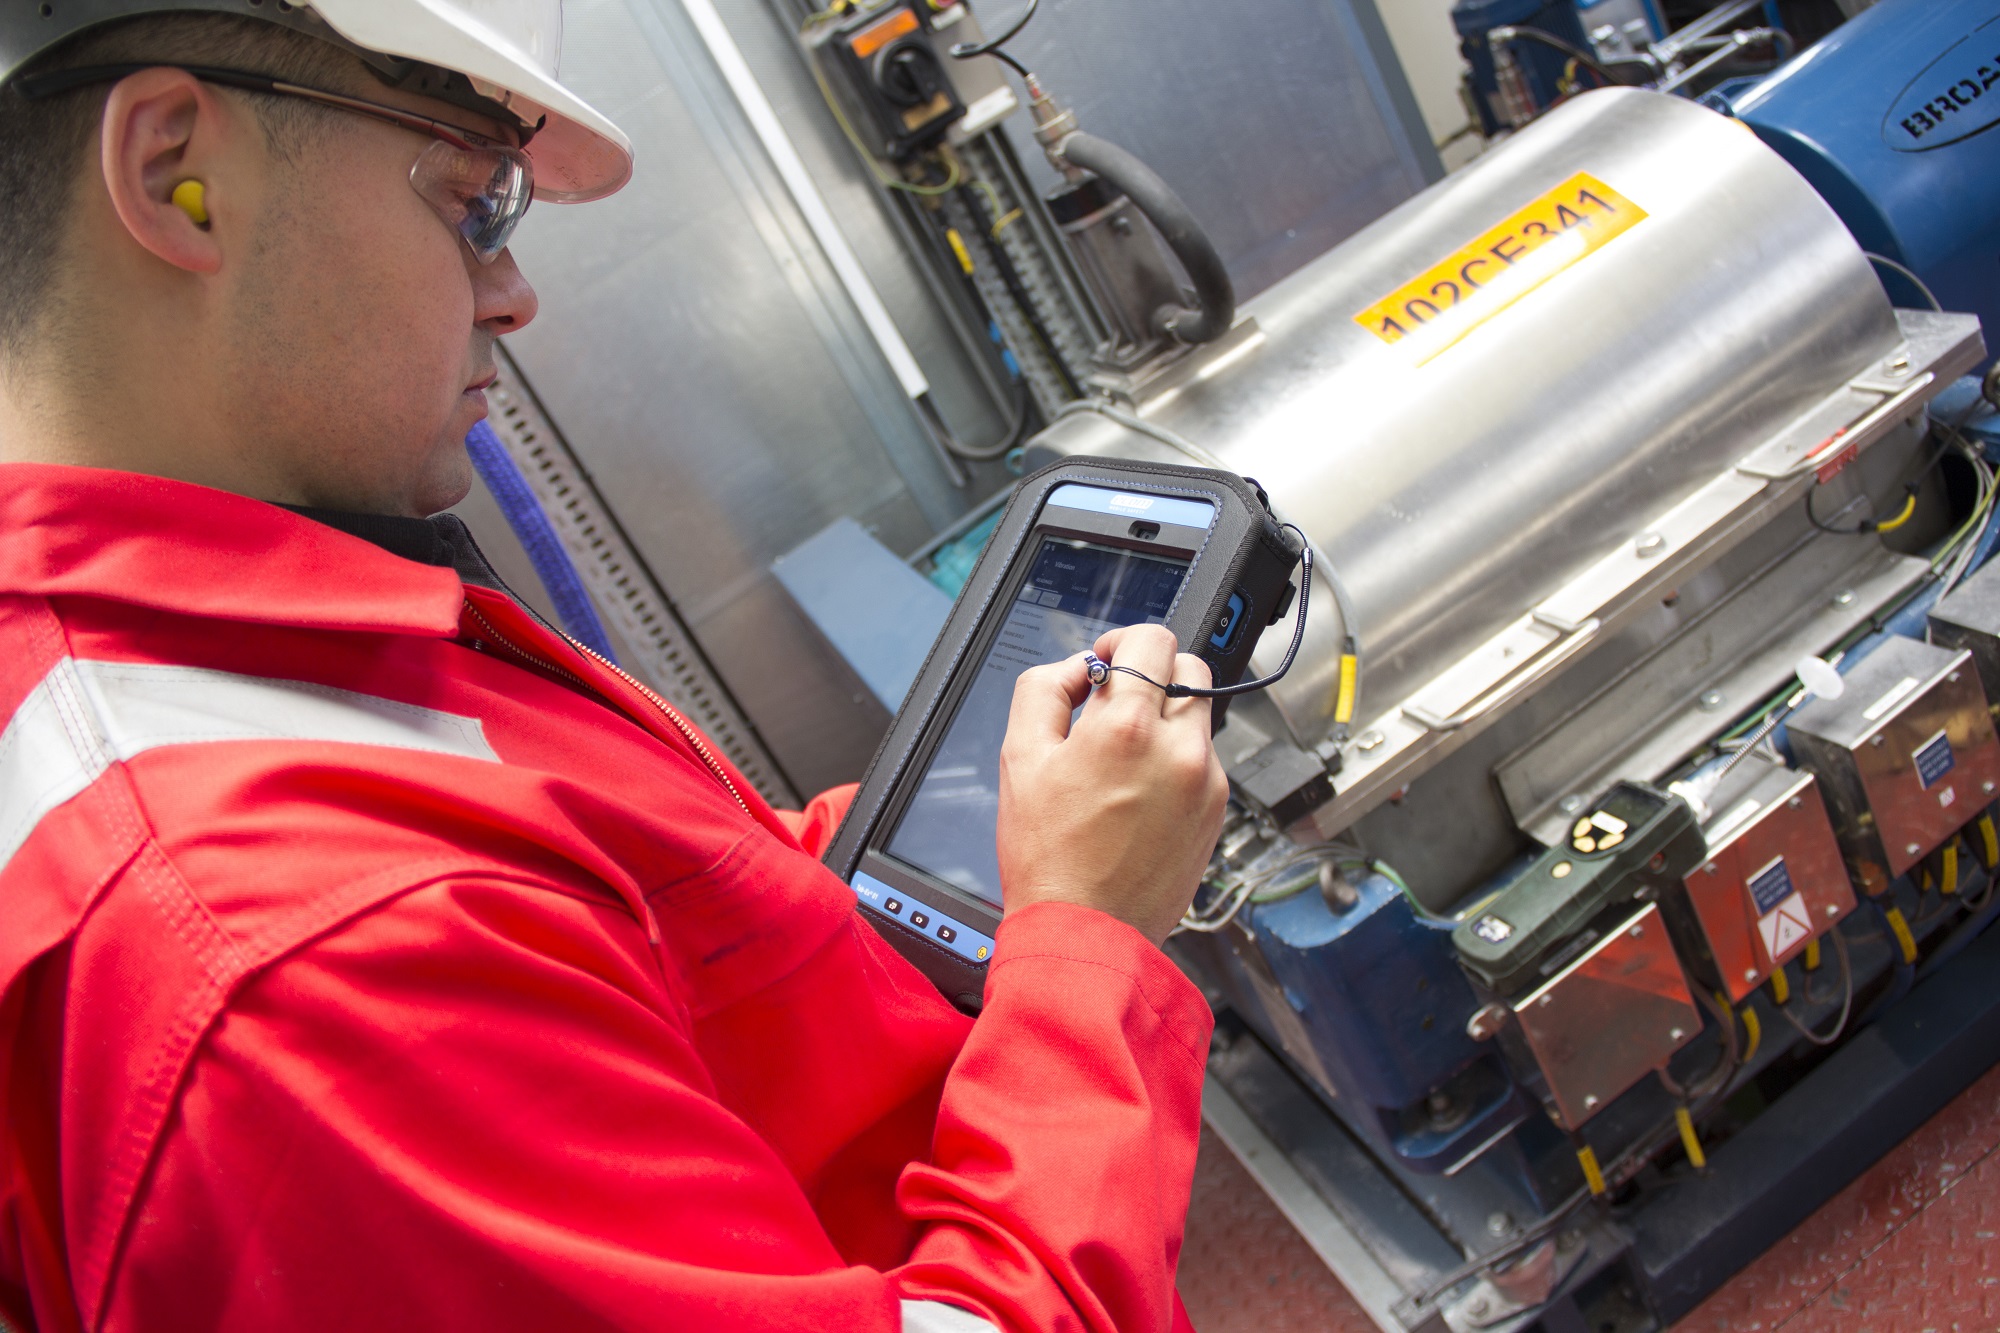 The condition monitoring system measures data including vibration, temperature, visual inspections, process parameters, lubrication management and basic oil analysis. (Image: AVT Reliability)